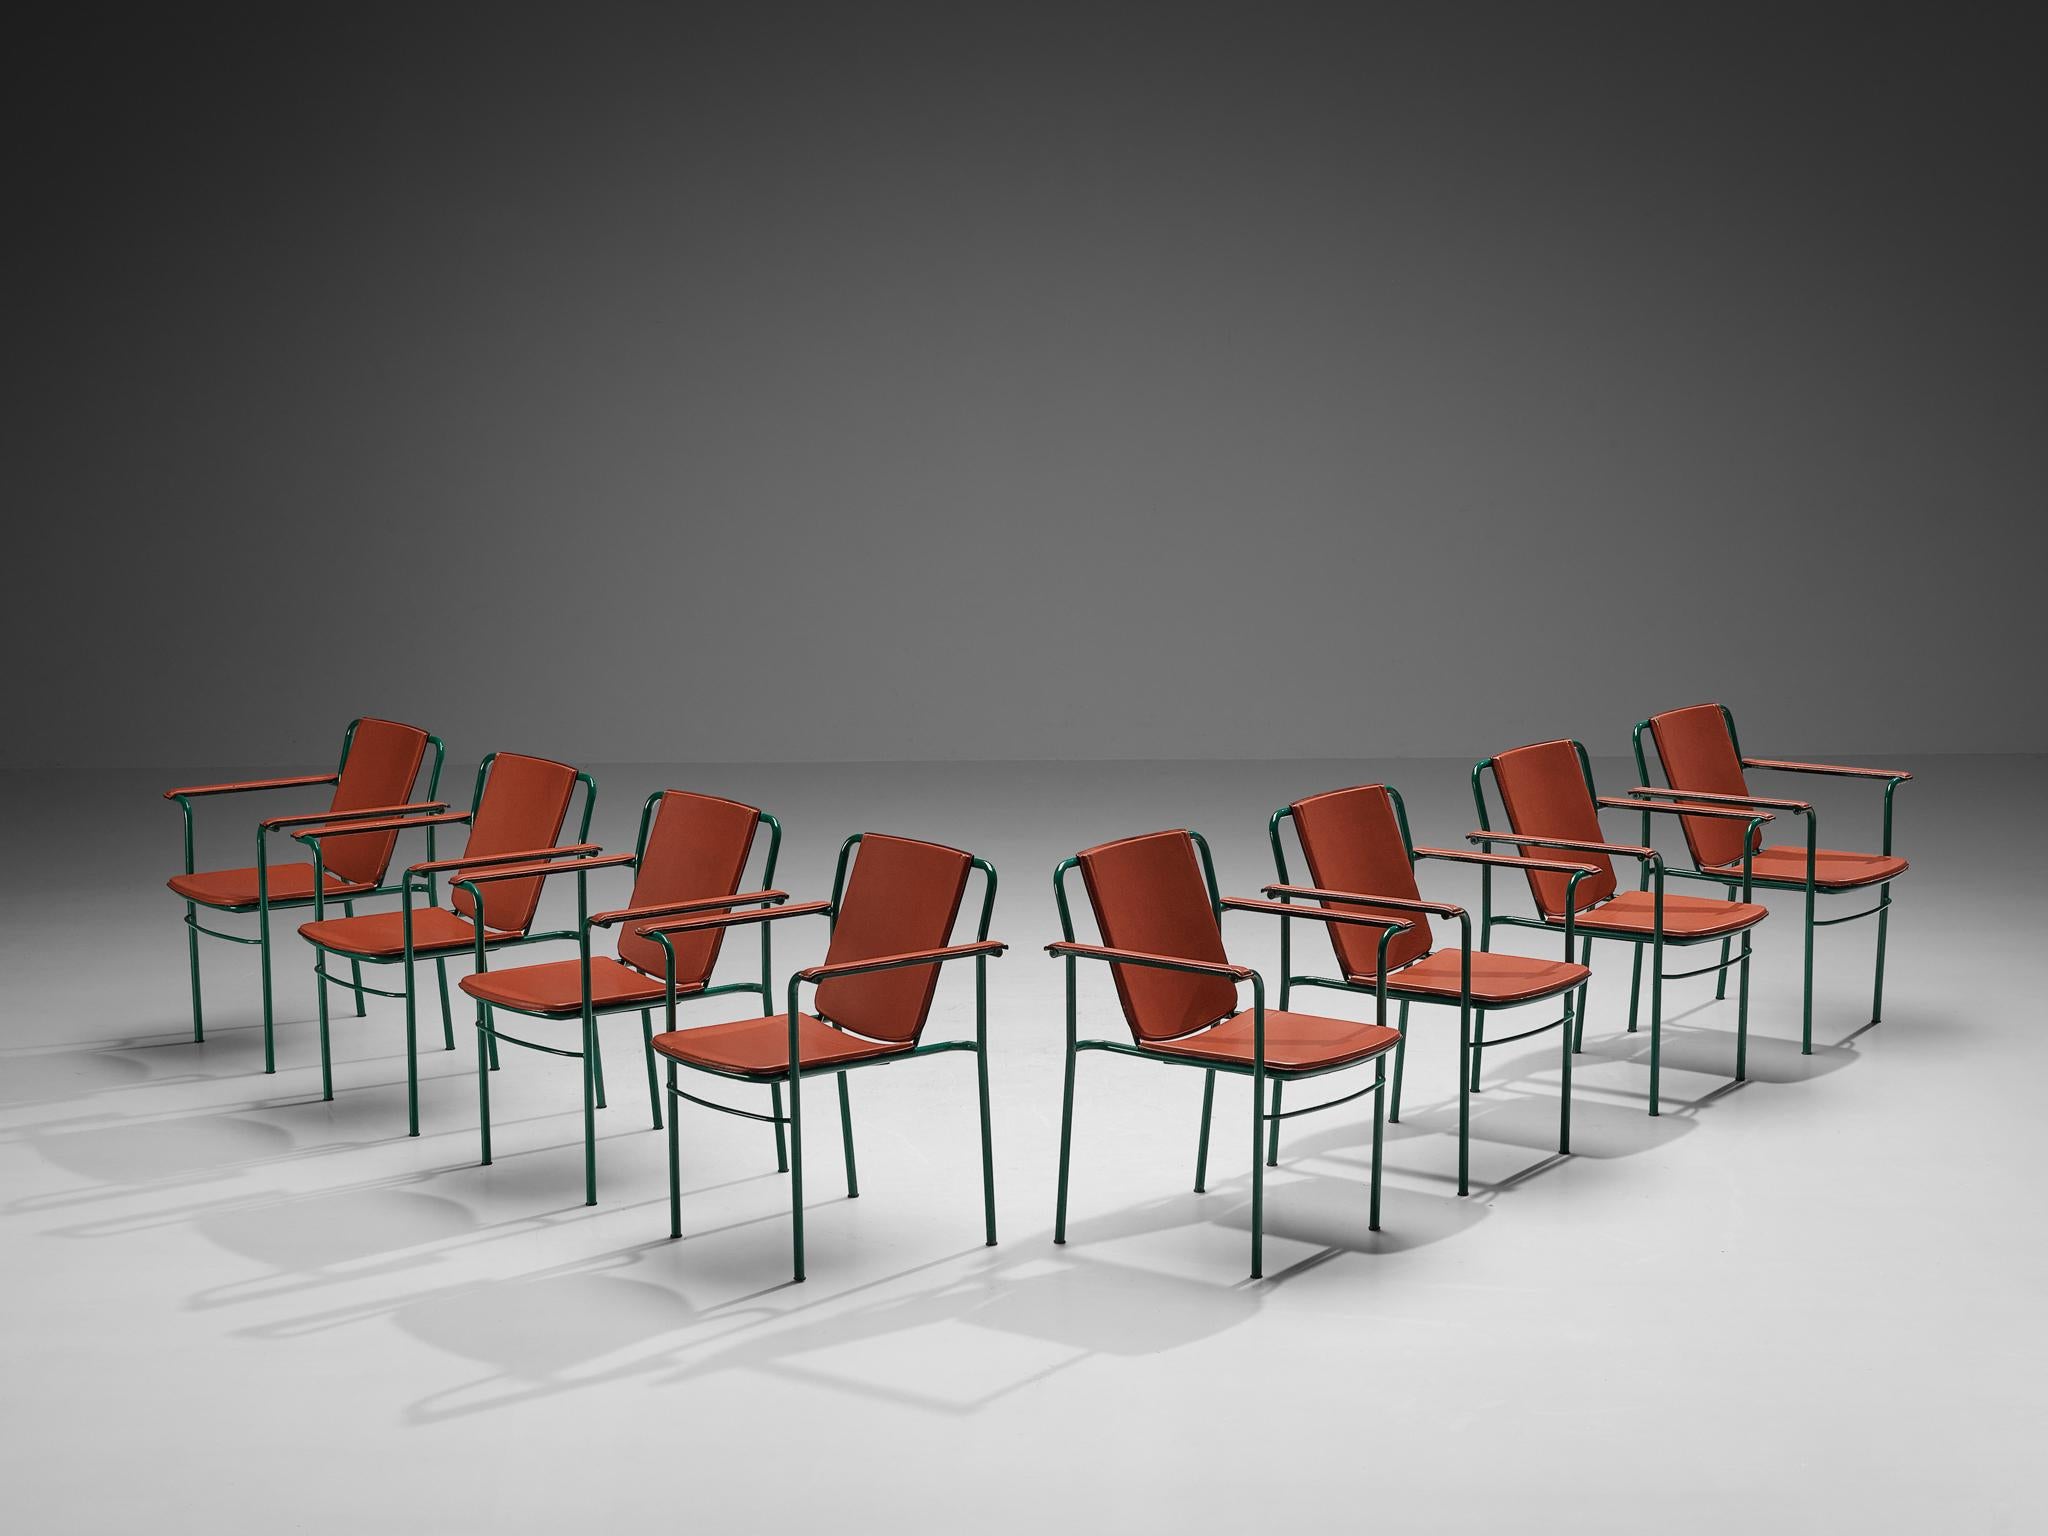 Mario Marenco for Poltrona Frau, set of eight 'Movie' armchairs, lacquered steel and leather, Italy, 1984.

Set of Italian armchairs in a bright color combination. The seat are padded and upholstered in coral red leather. The edges have a black